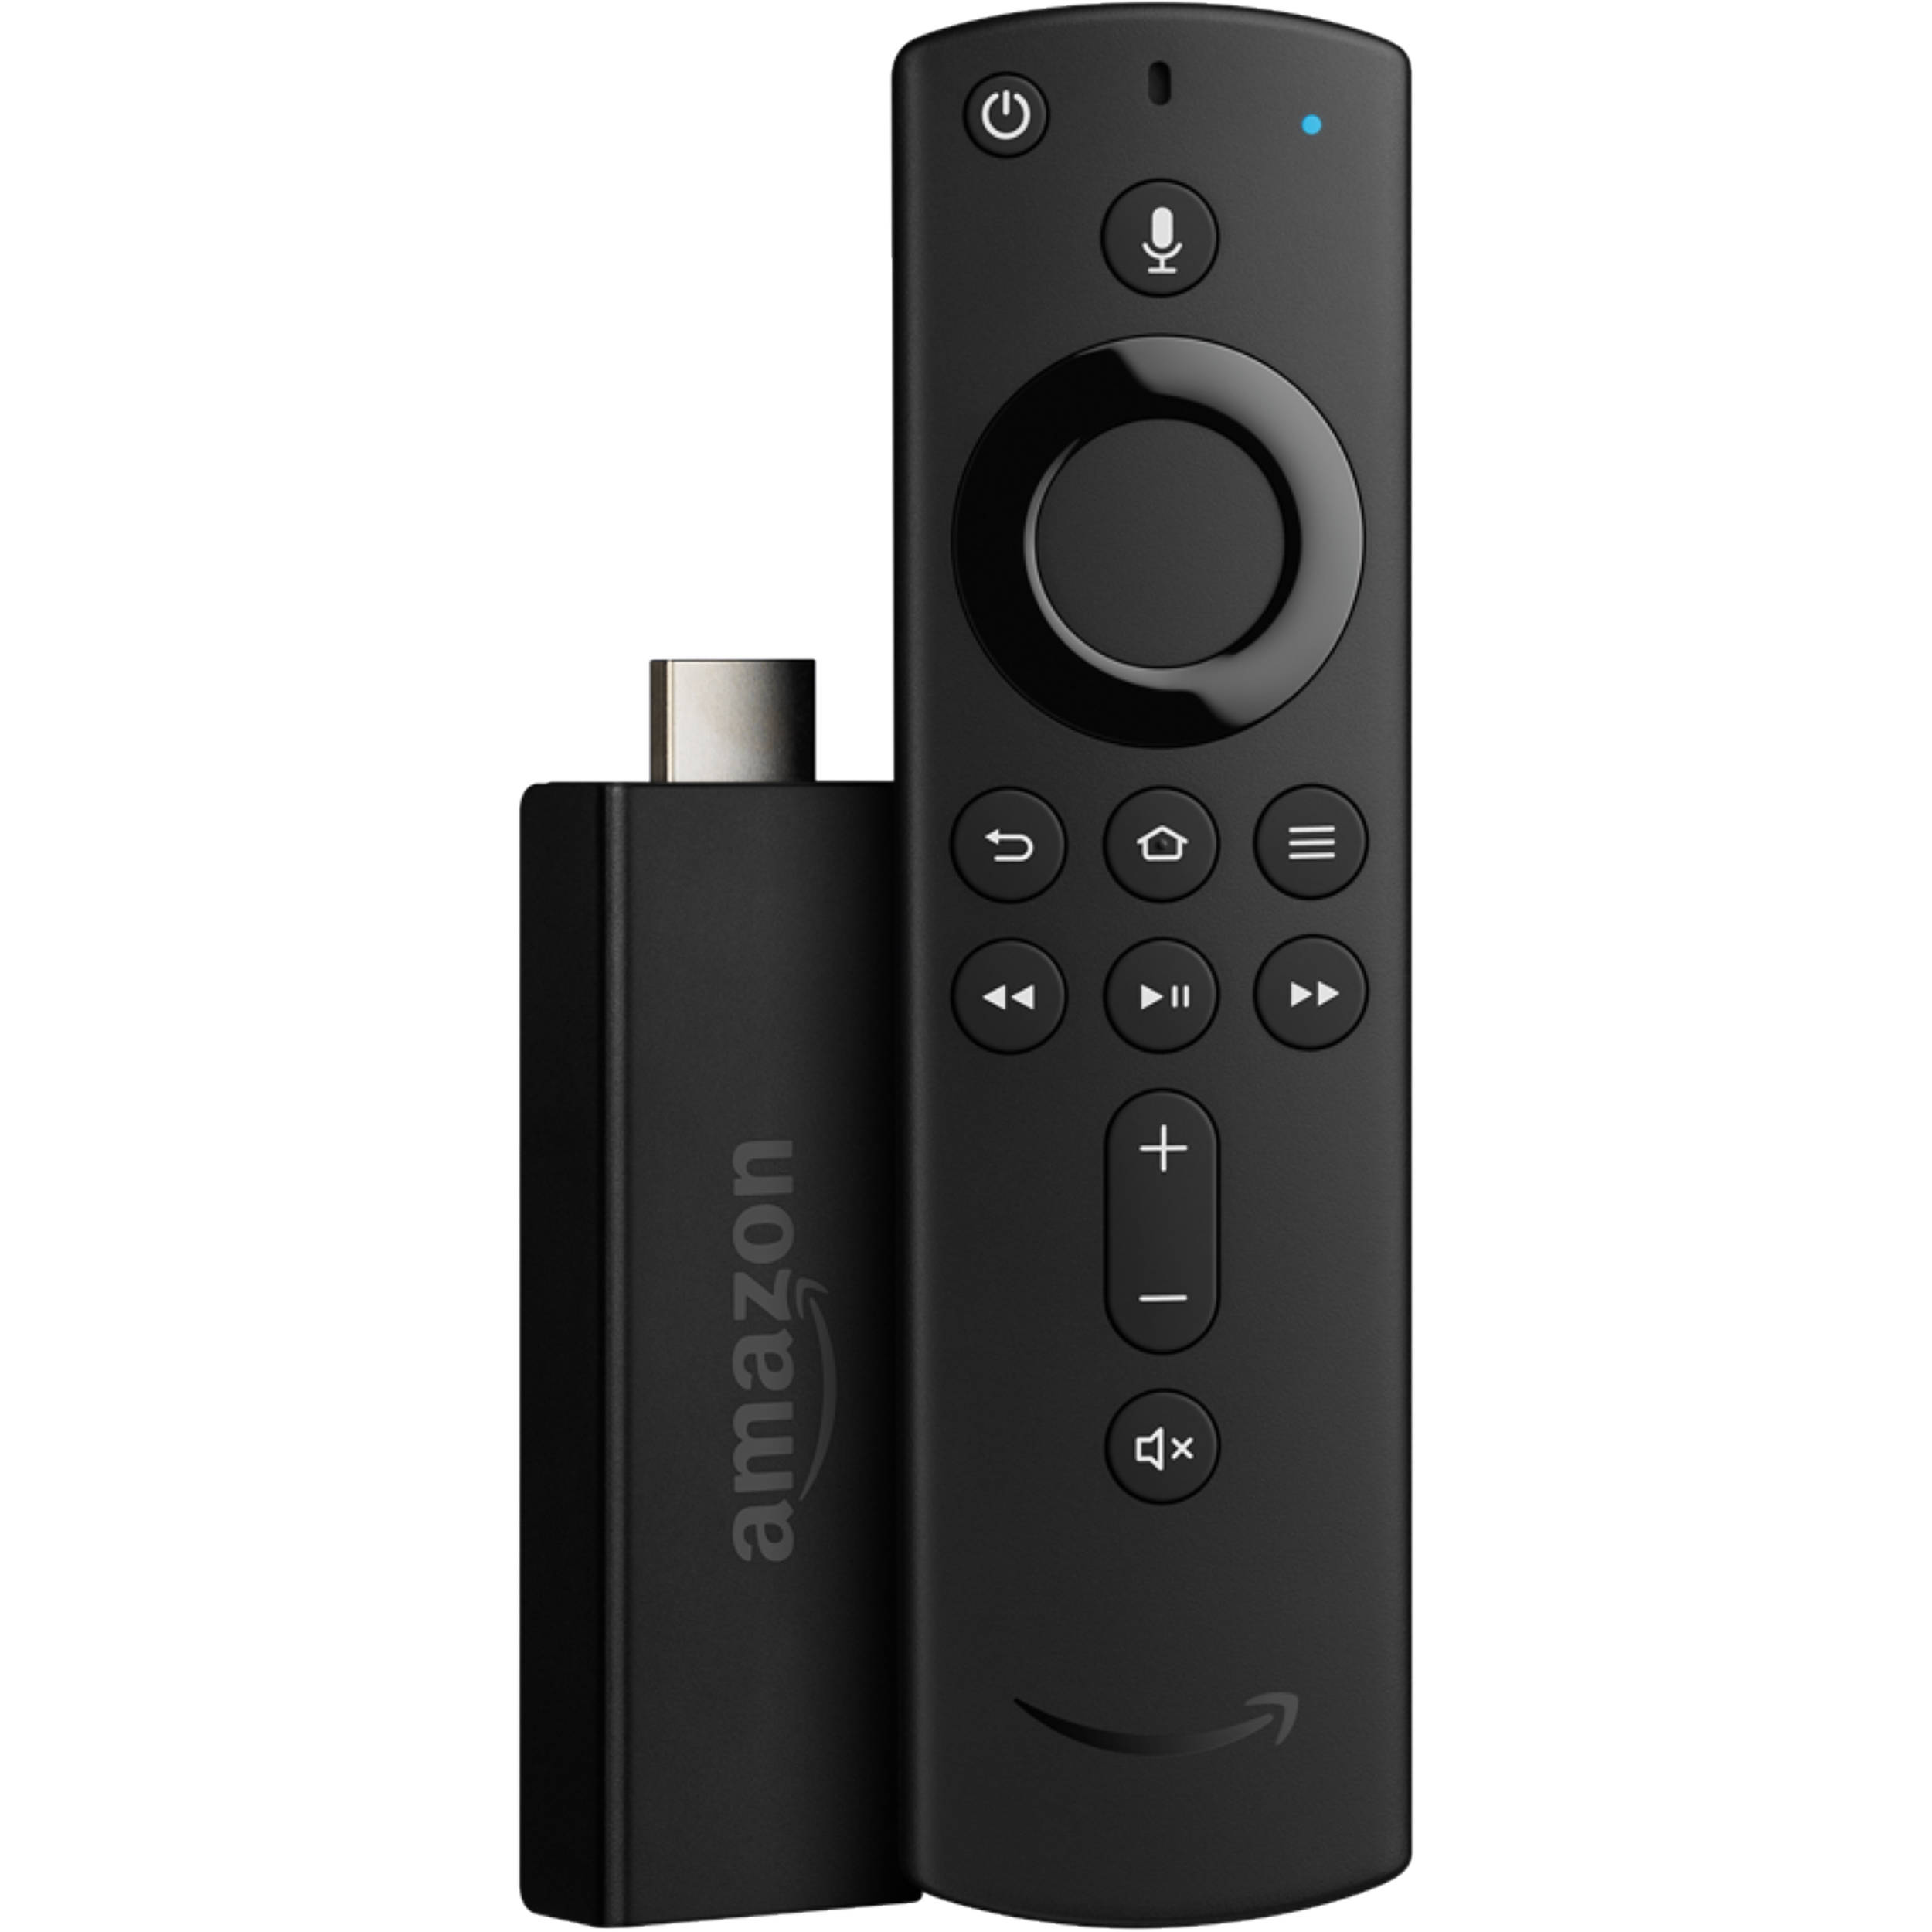 video and tv cast for fire tv